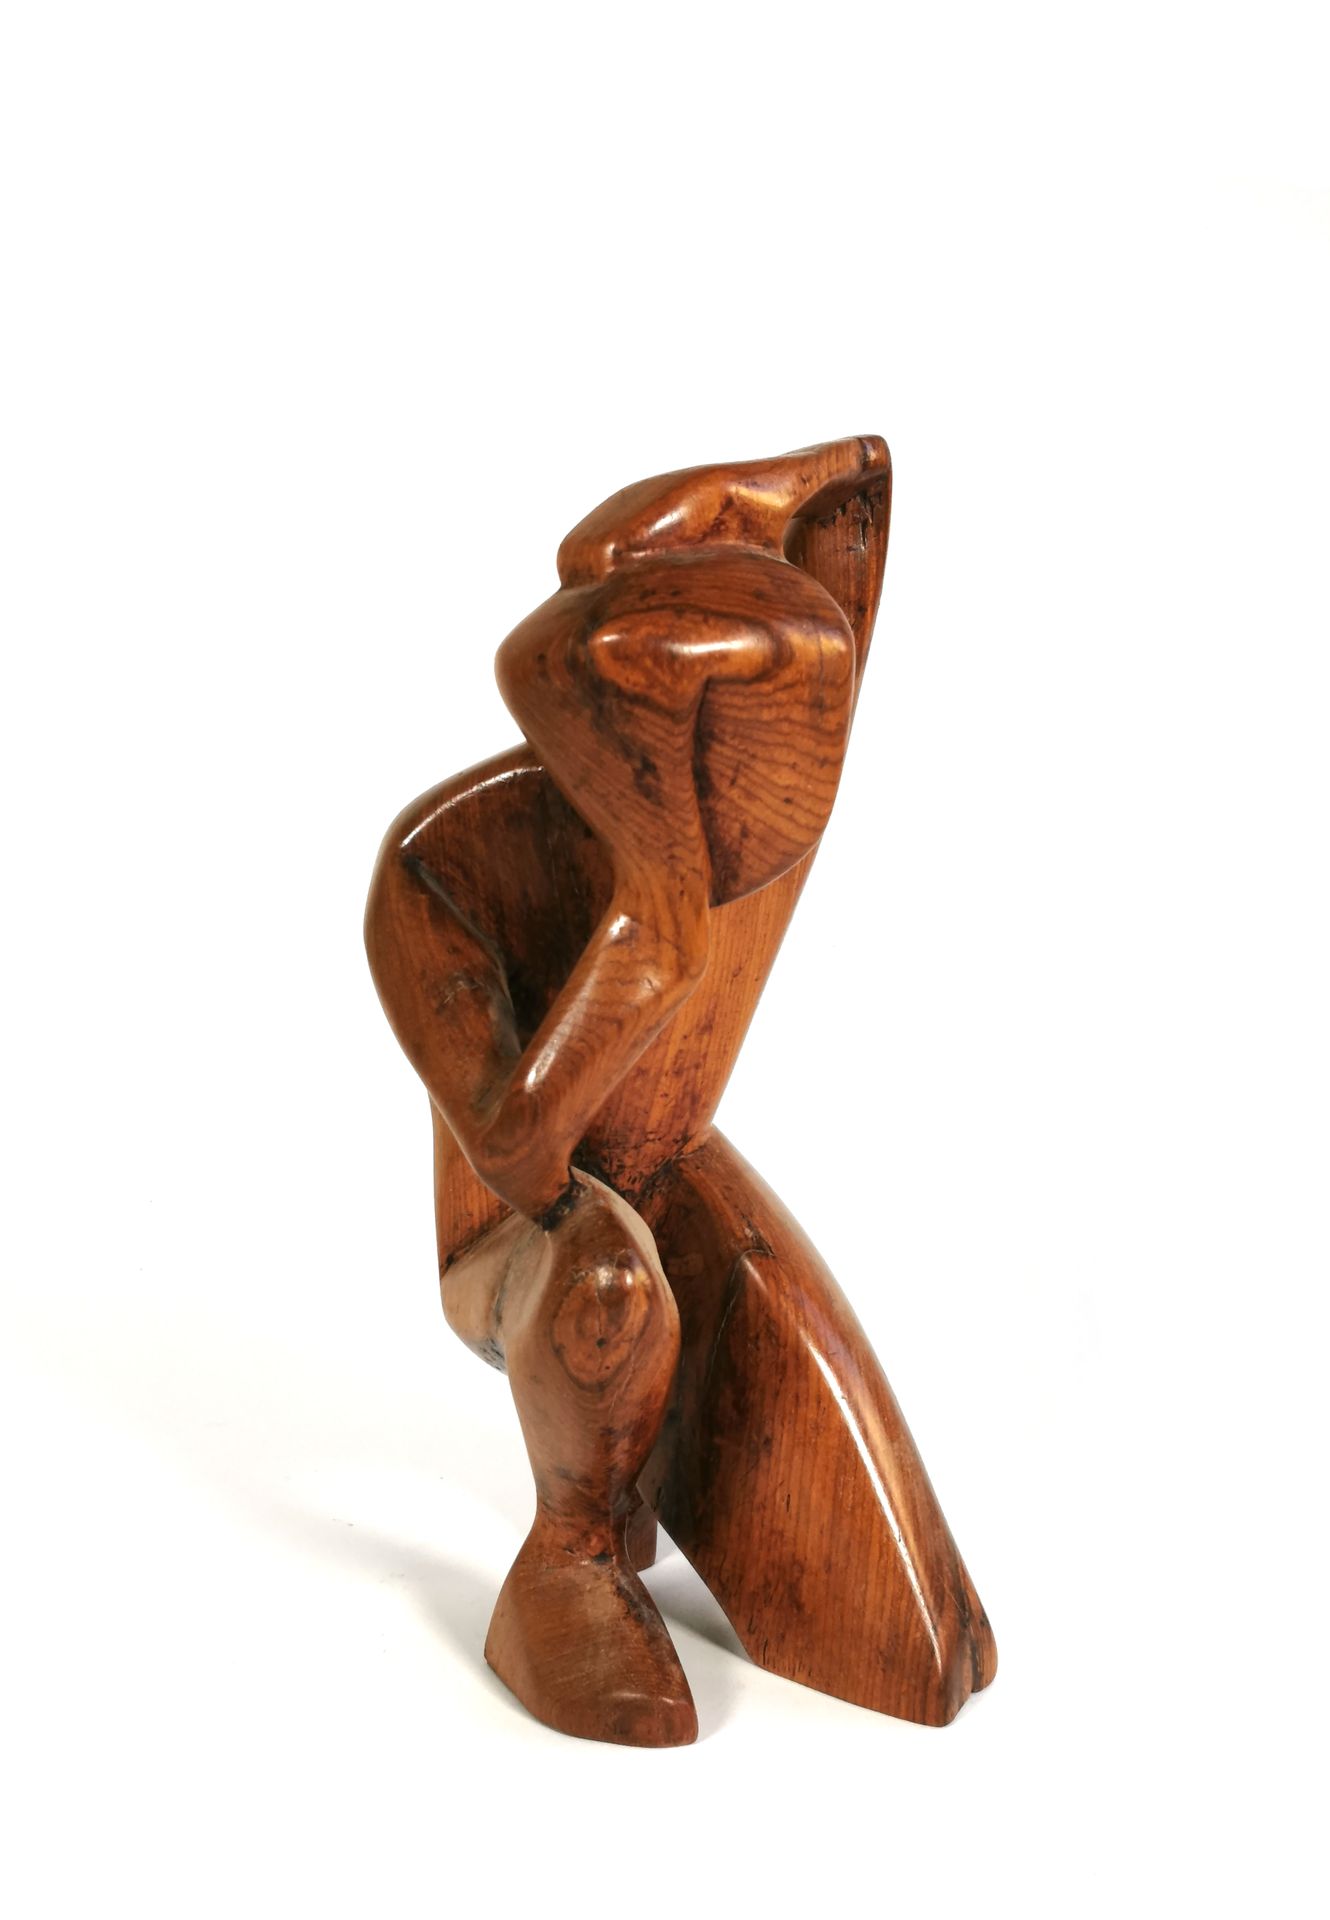 Null WORK FROM THE 80'S

"Crouching man".

Direct carving in wood.

H. 31 cm